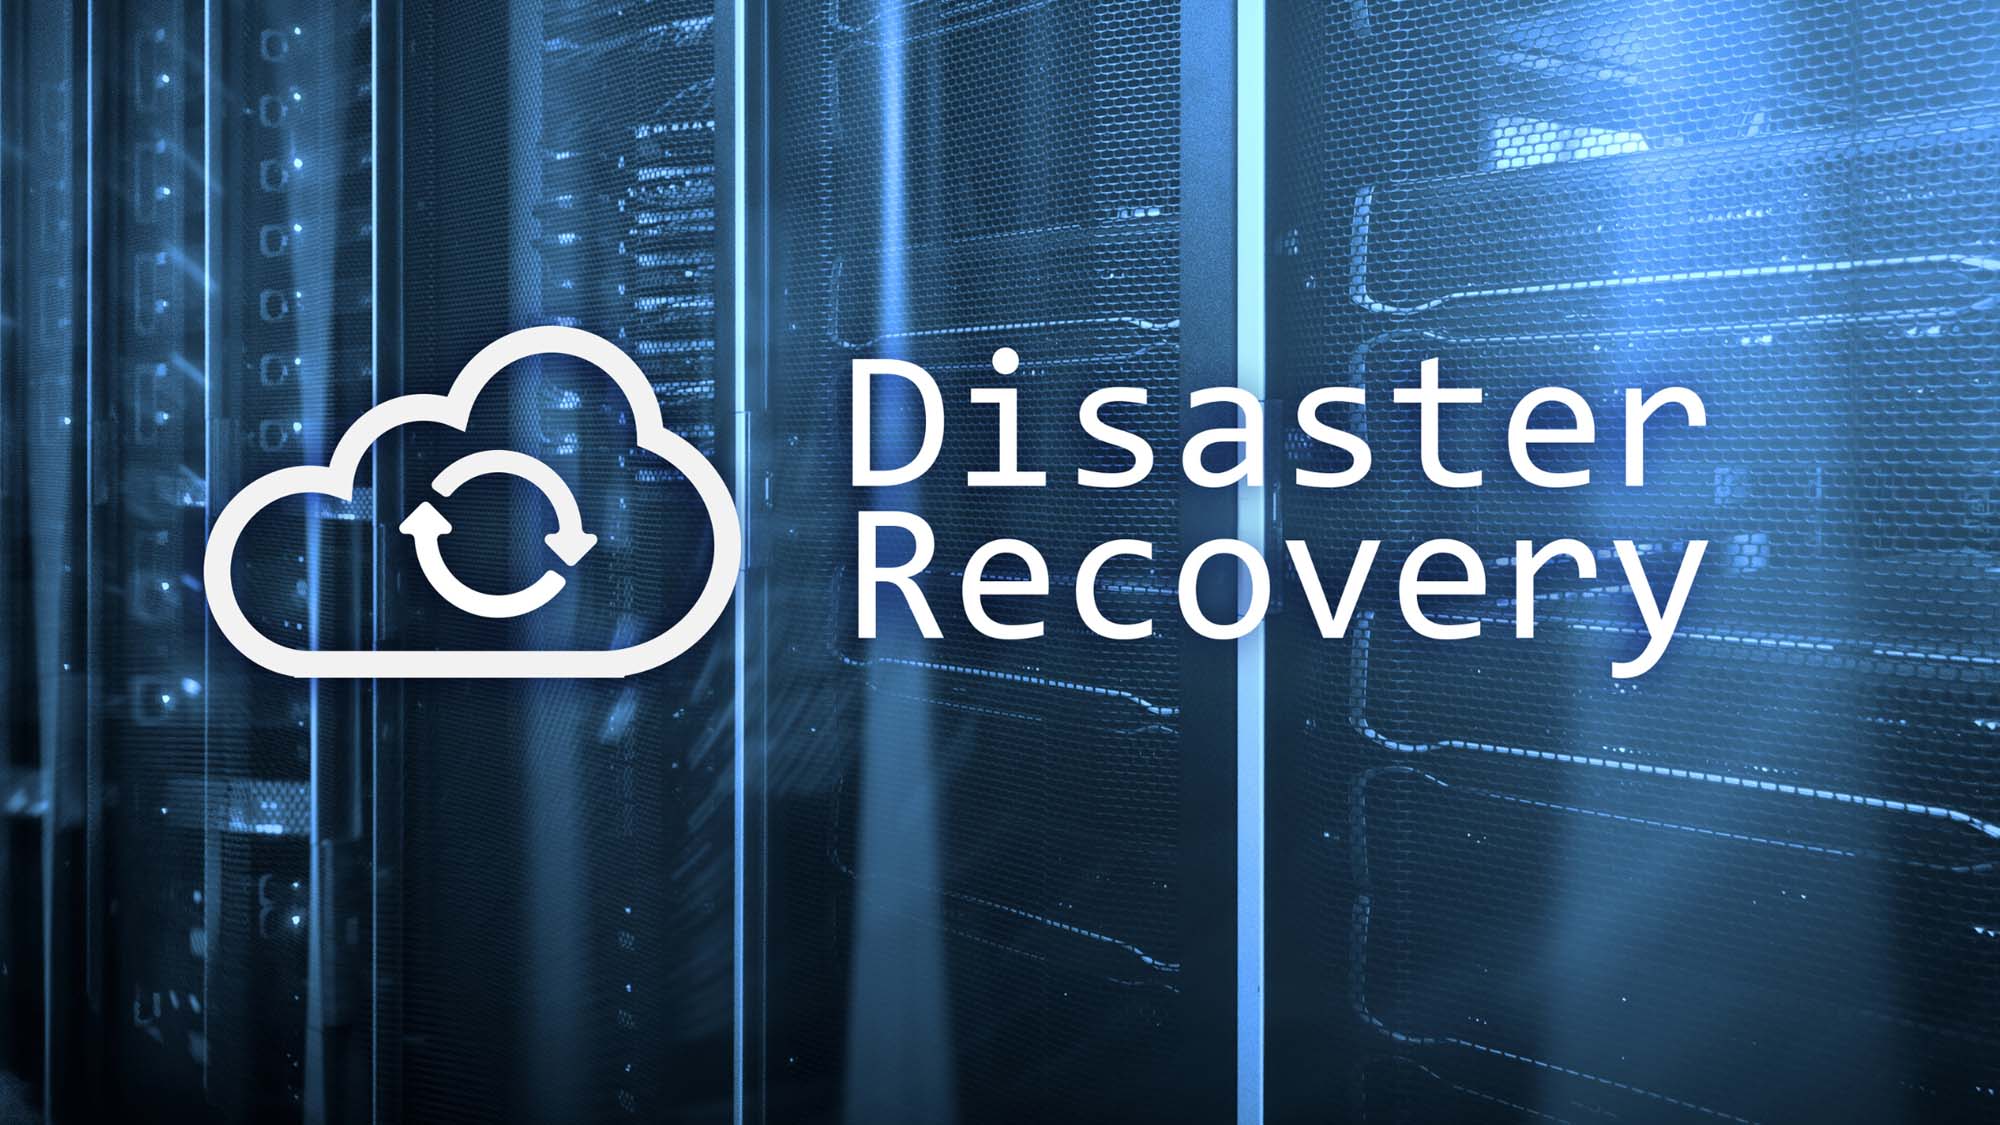 A cloud recovery icon and the words “Disaster Recovery” against a background of servers.